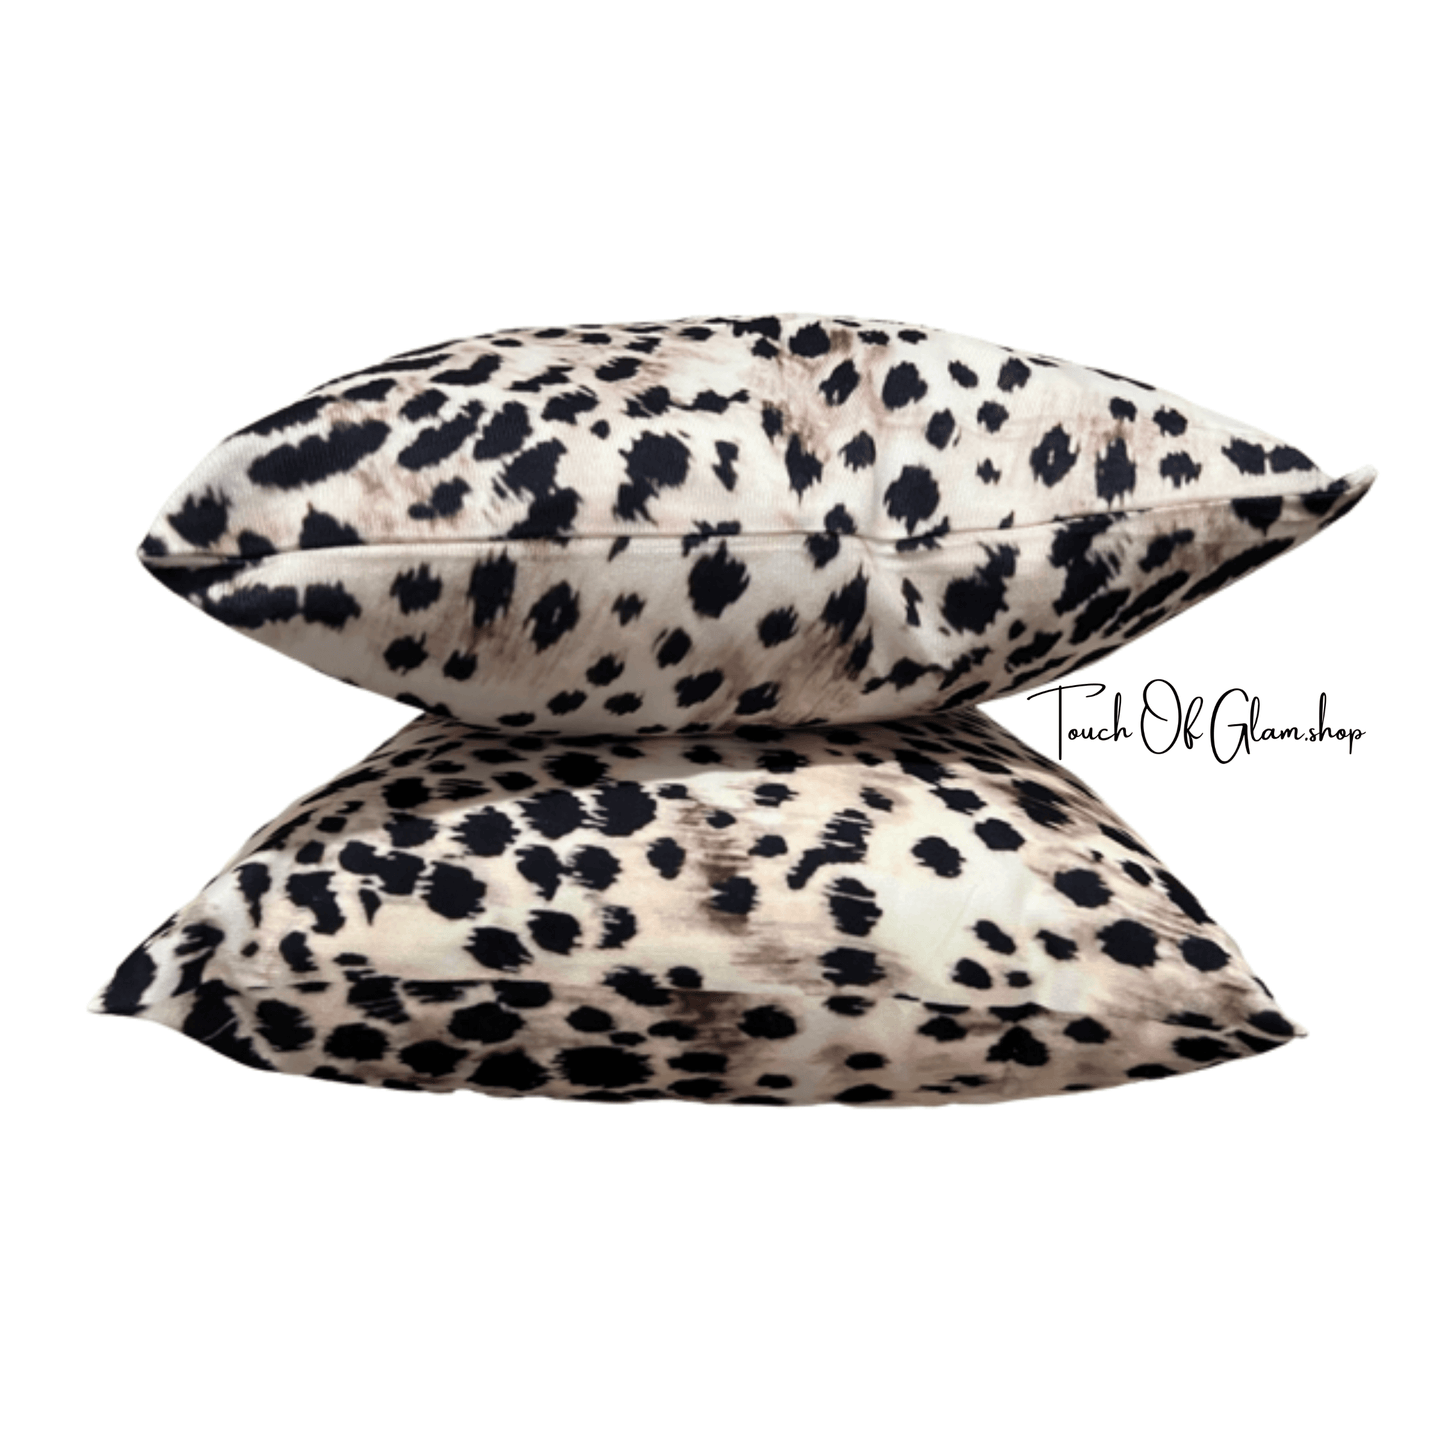 Wholesale Throw Pillow Cover, Leopard Print, Faux Animal